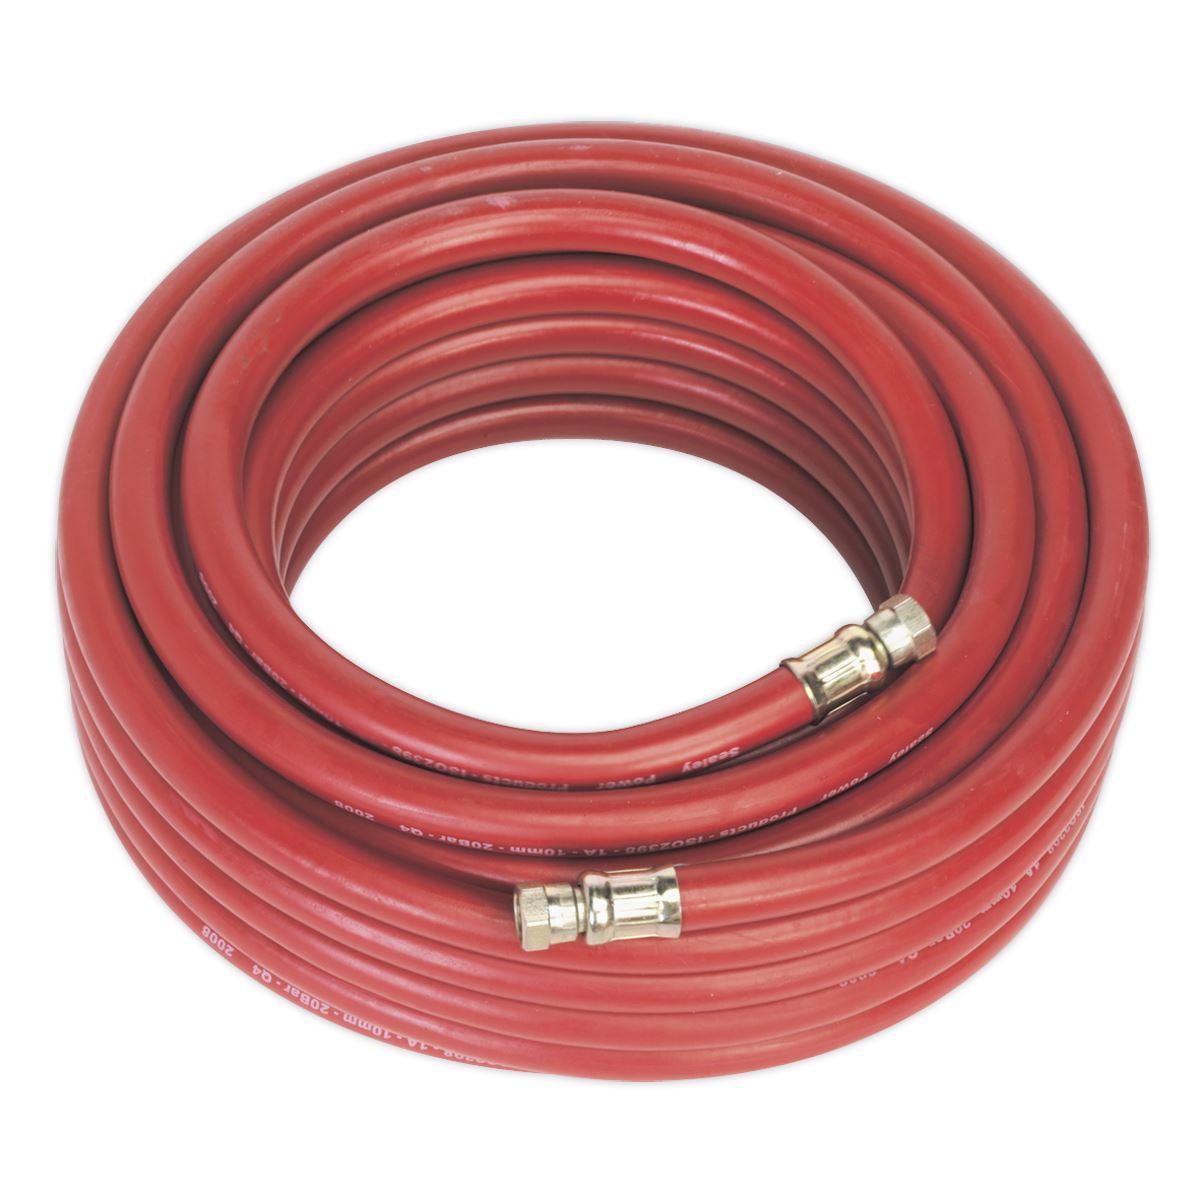 Sealey Air Hose 15m x Ø10mm with 1/4"BSP Unions